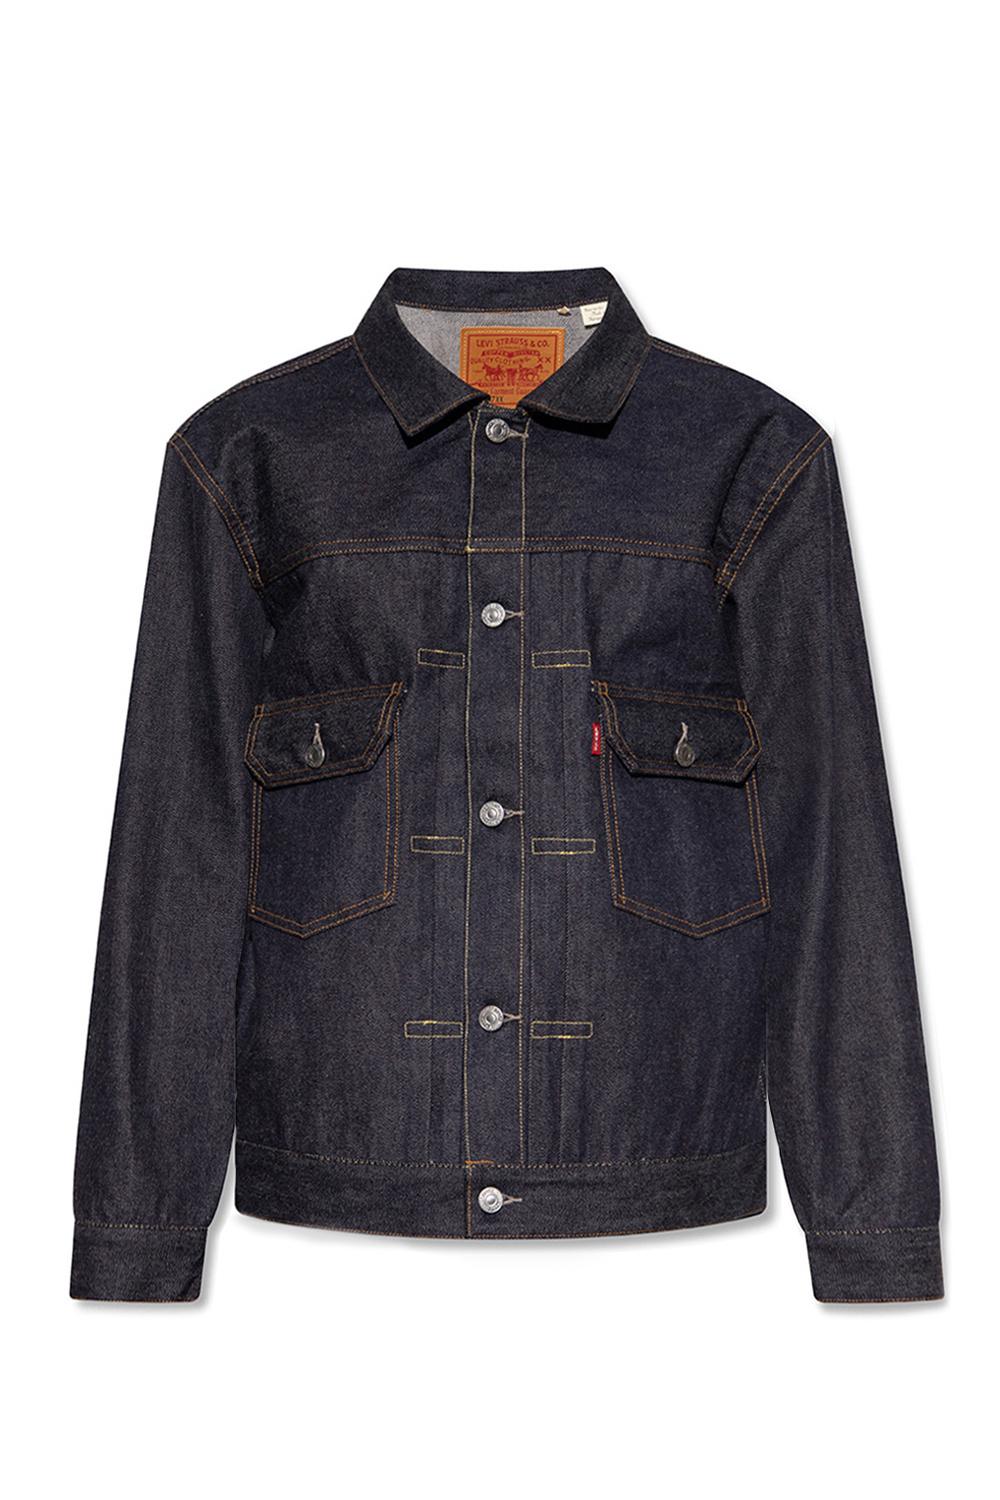 IetpShops | Men's ons Clothing | Levi's The 'Vintage ons Clothing